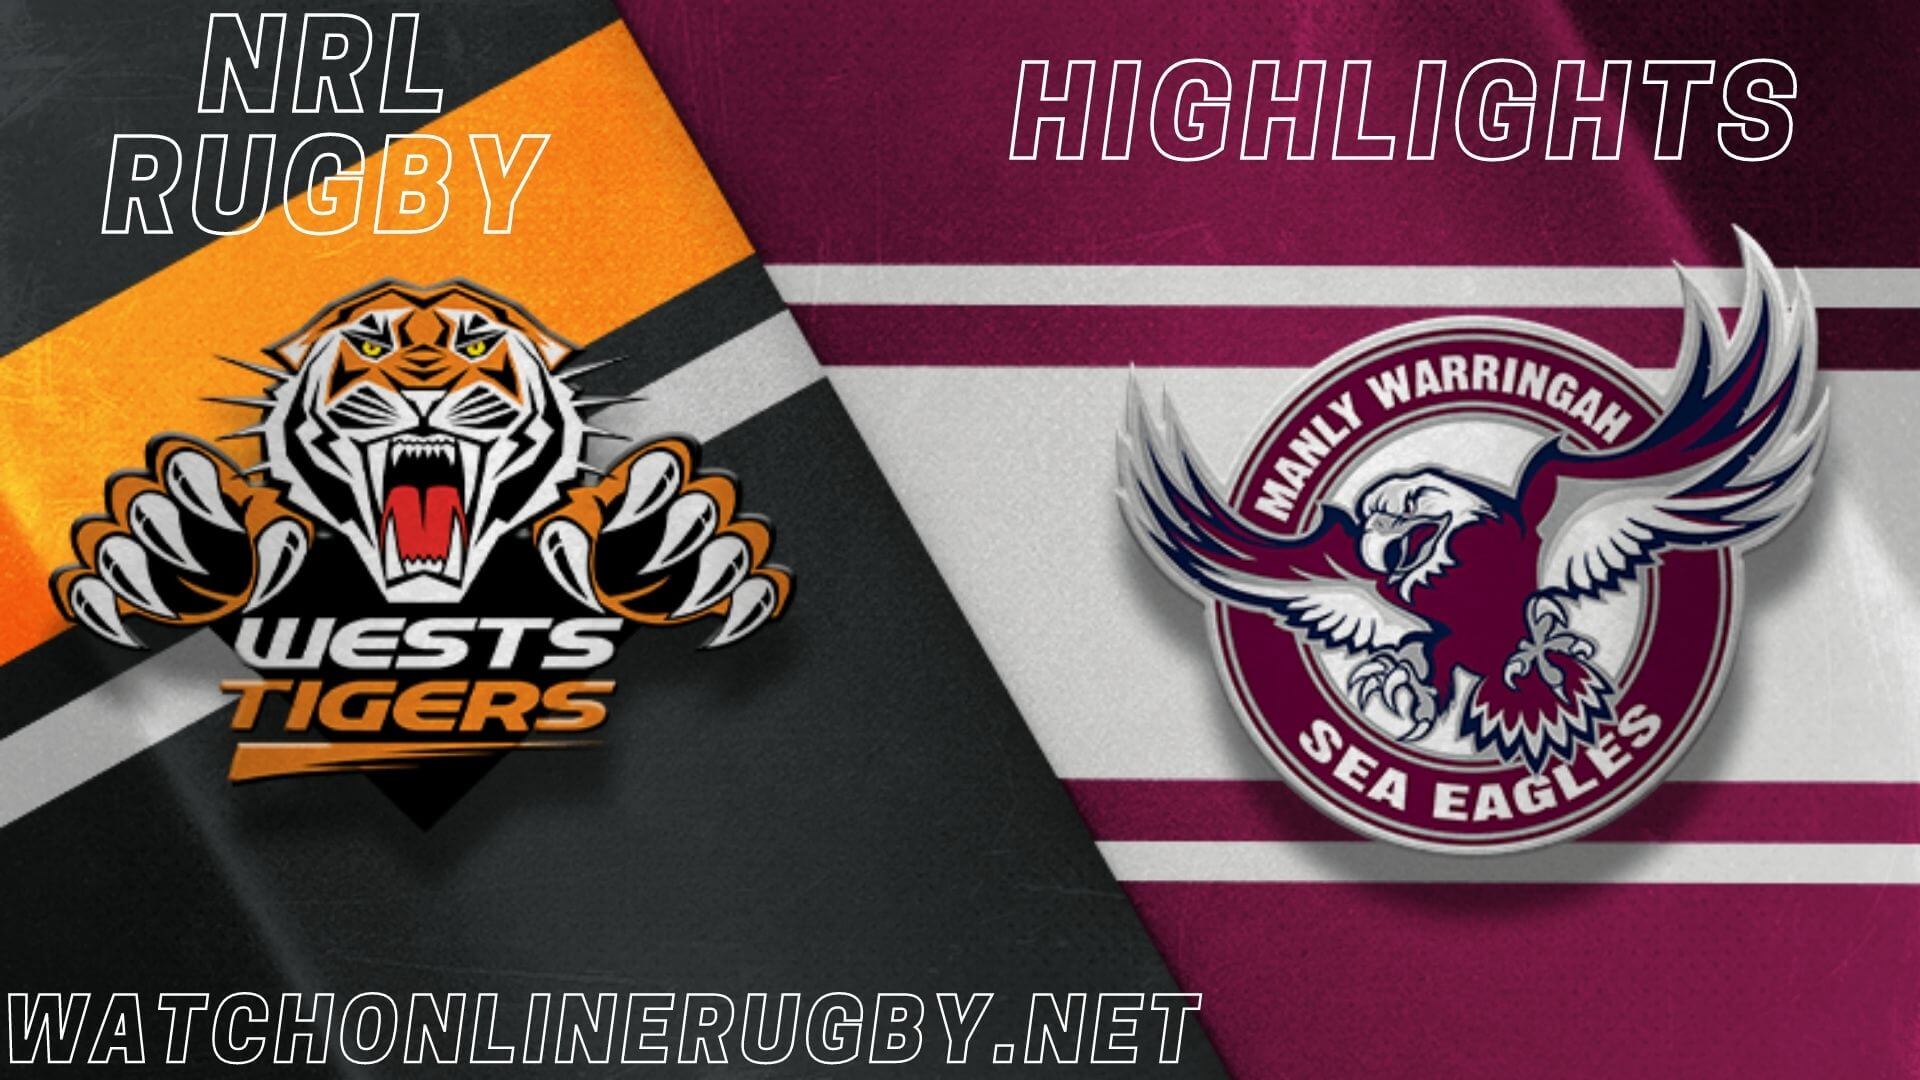 Sea Eagles Vs Wests Tigers Highlights RD 9 NRL Rugby